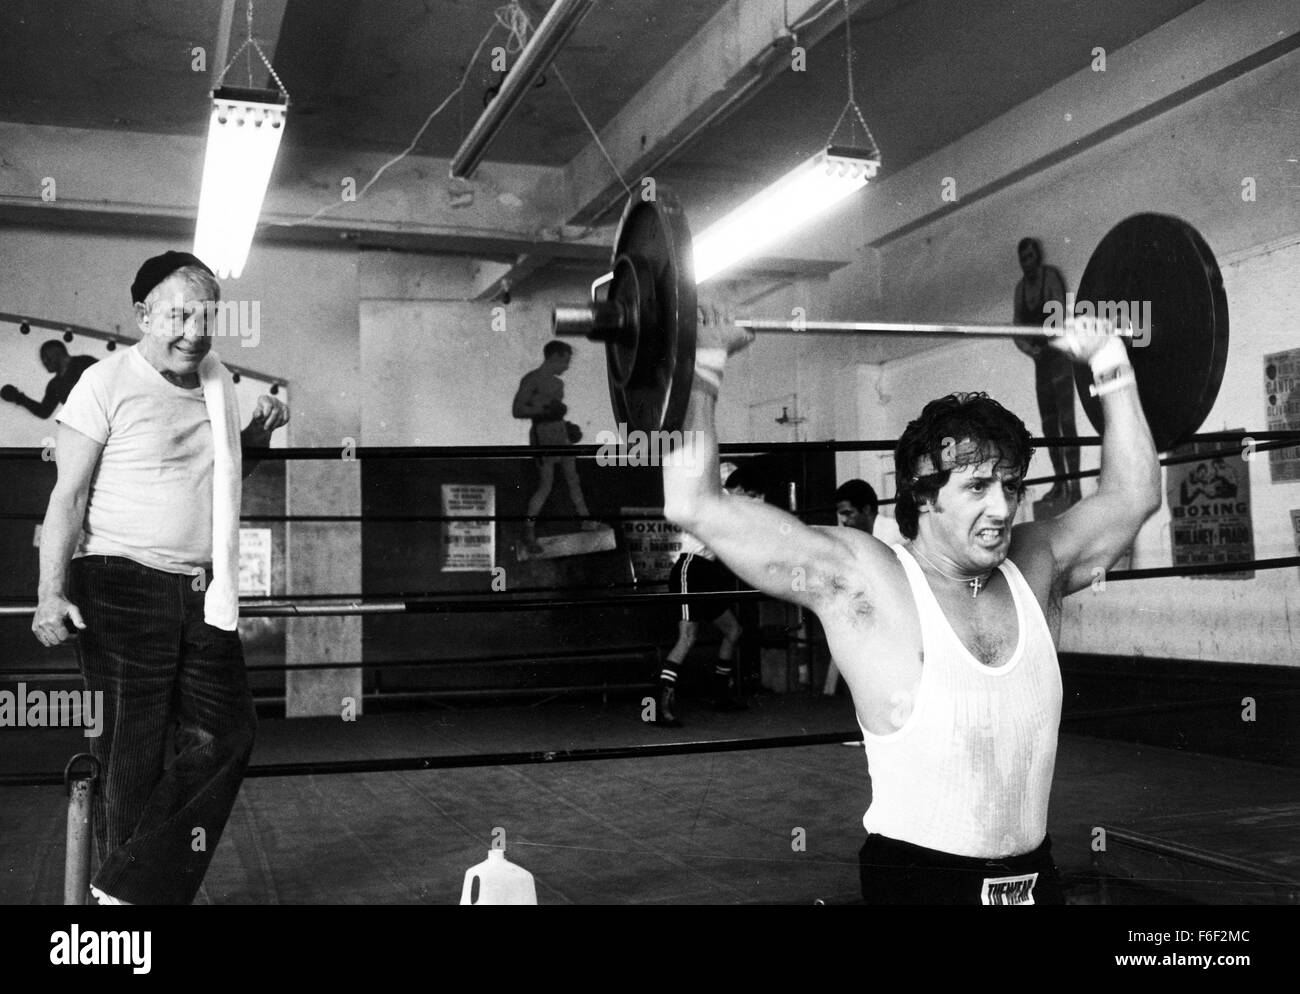 Jun 15, 1979; Philadelphia, PA, USA; SYLVESTER STALLONE (front) as Rocky Balboa and BURGESS MEREDITH as Mickey Goldmill in the action, sport, drama 'Rocky II' directed by Sylvester Stallone. Stock Photo